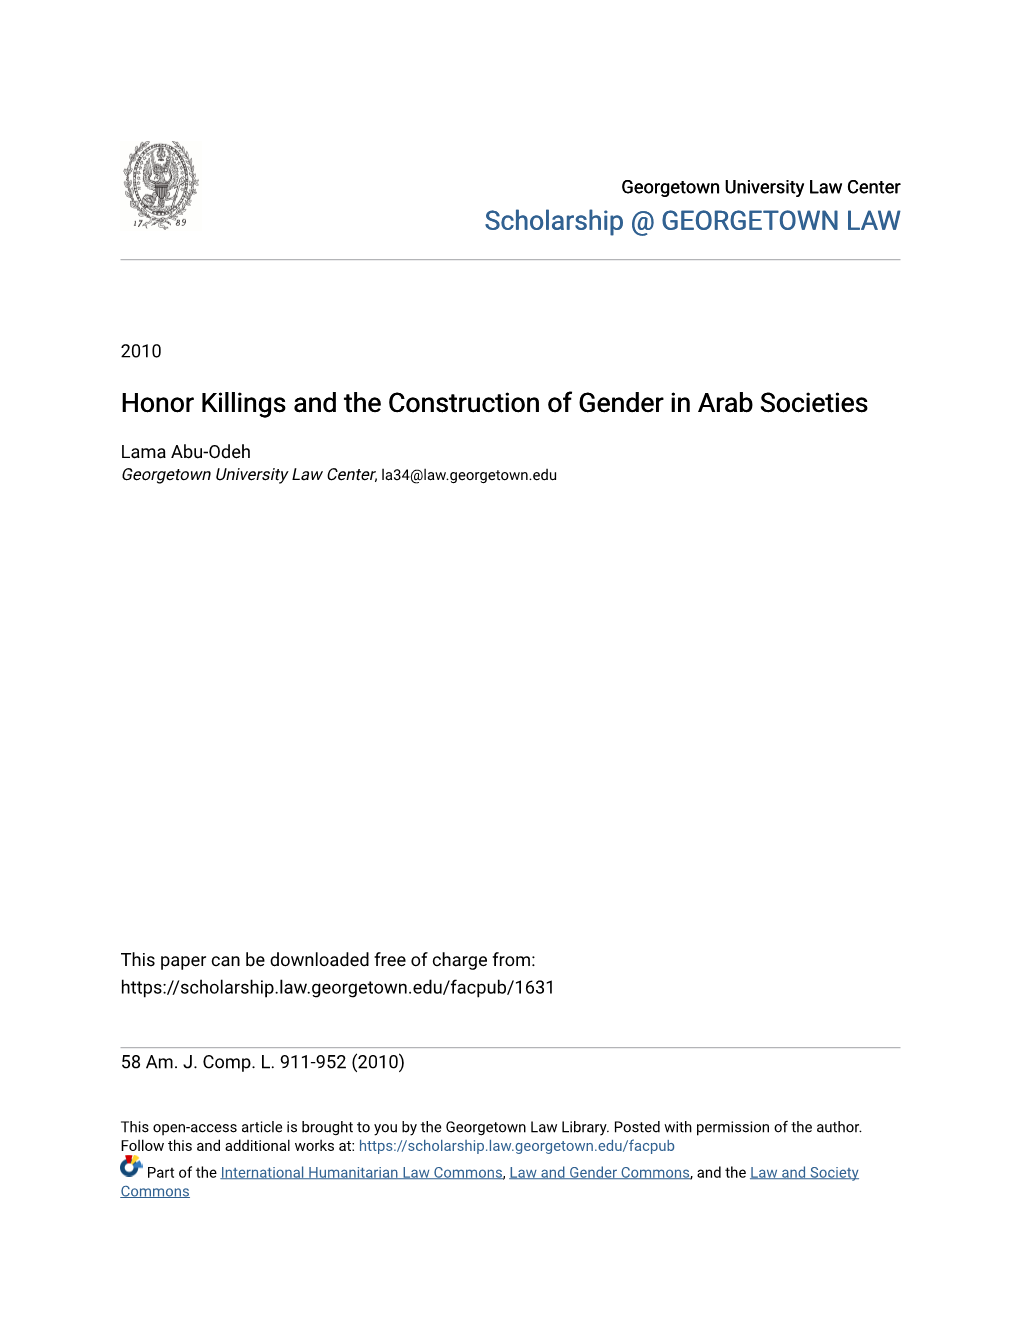 Honor Killings and the Construction of Gender in Arab Societies